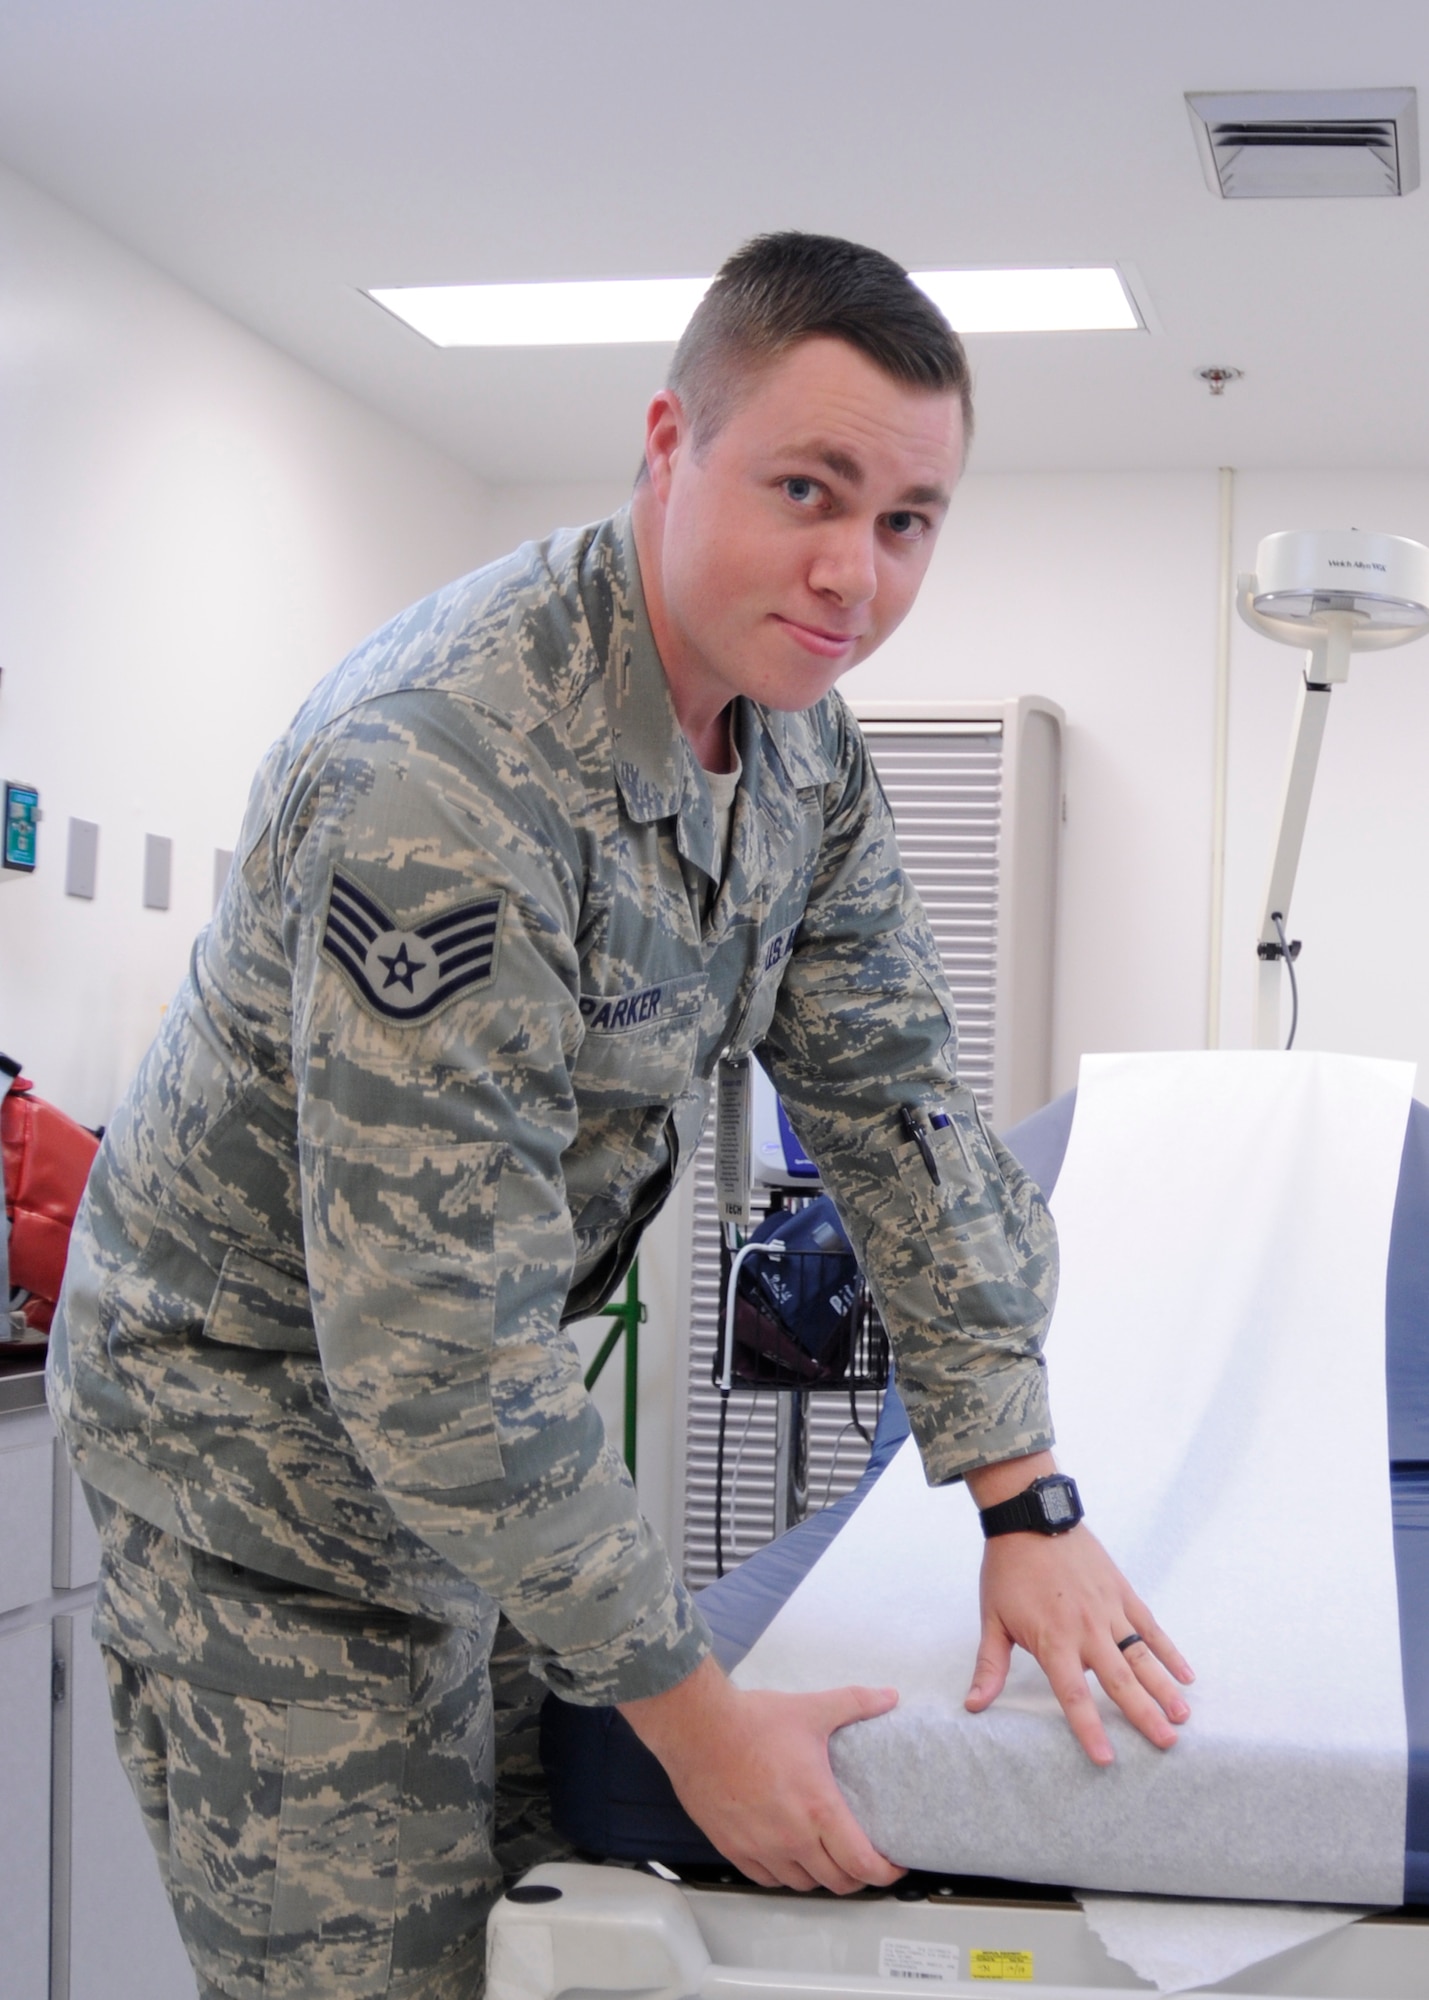 U.S. Air Force Staff Sgt. Jason Parker, 325th Aerospace Medical Squadron medical service craftsman, preps a waiting table for a patient in the Tyndall Air Force Base medical clinic, Fla., Oct. 25, 2016. Airmen like Parker handle the patient care and the administrative records of individuals who come to receive physical health assessments and other medical appointments at the 325th Medical Group. (U.S. Air Force photo by Senior Airman Solomon Cook/Released) 